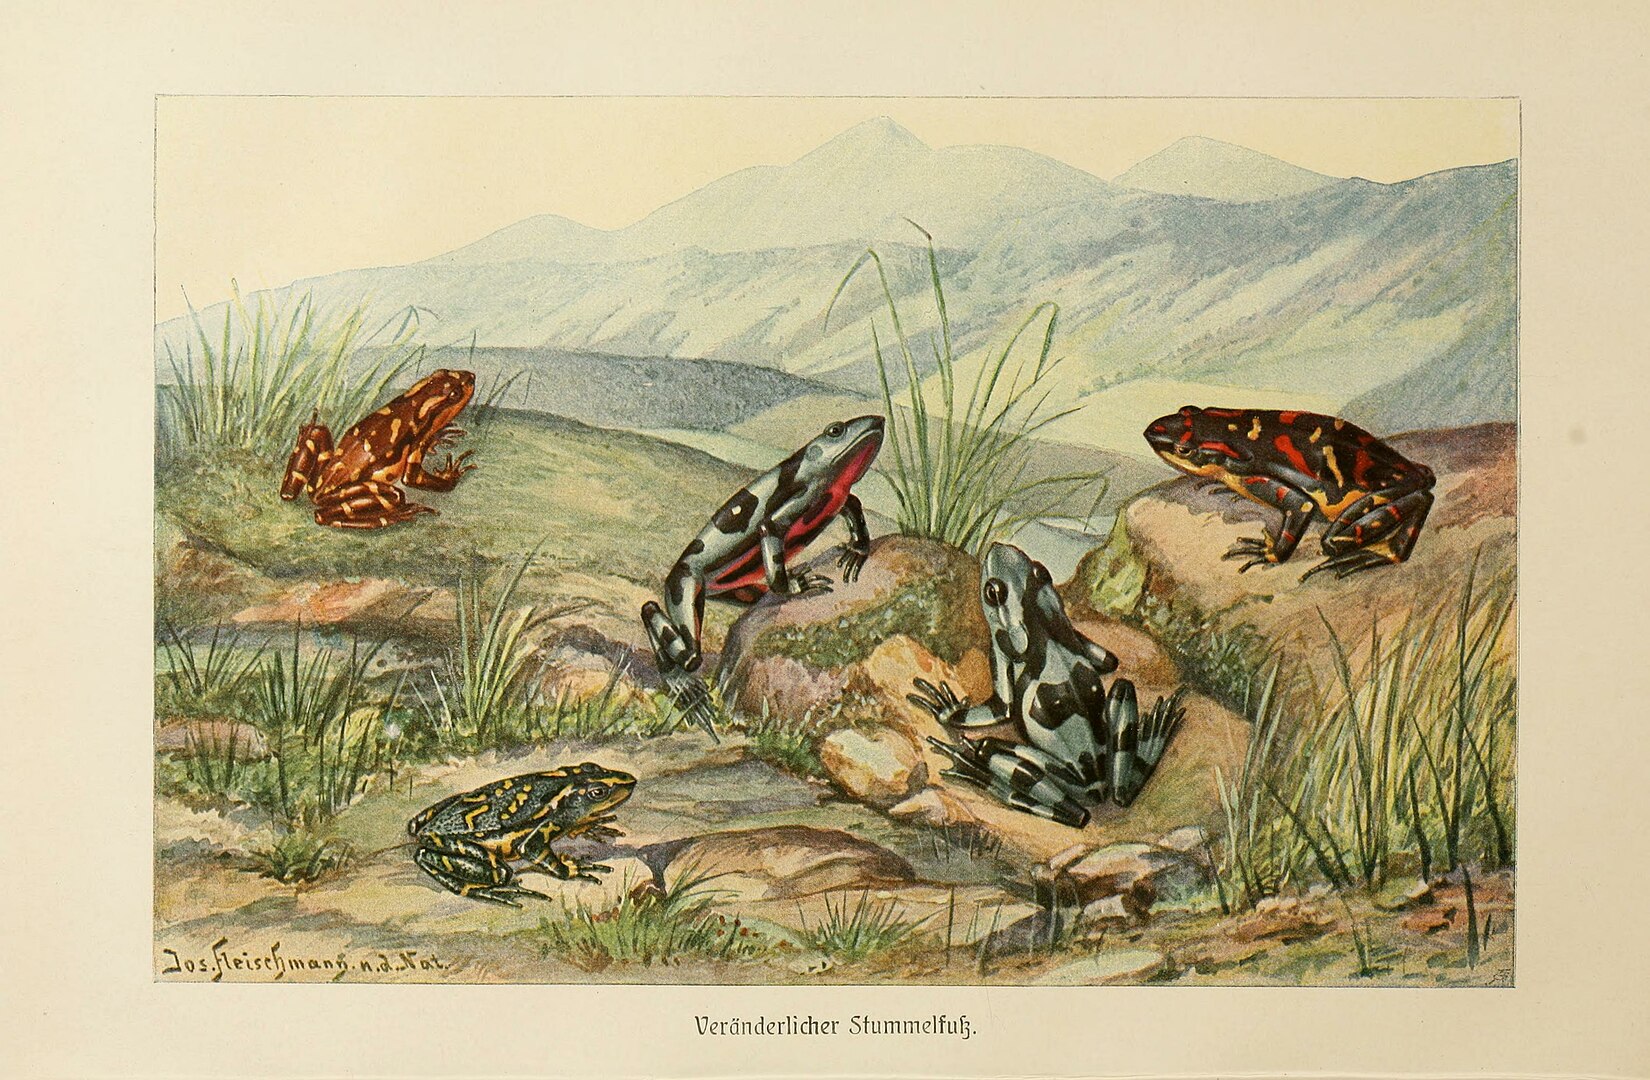 A closeup of various exotic frogs in grasslands with a view of mountains in the distance